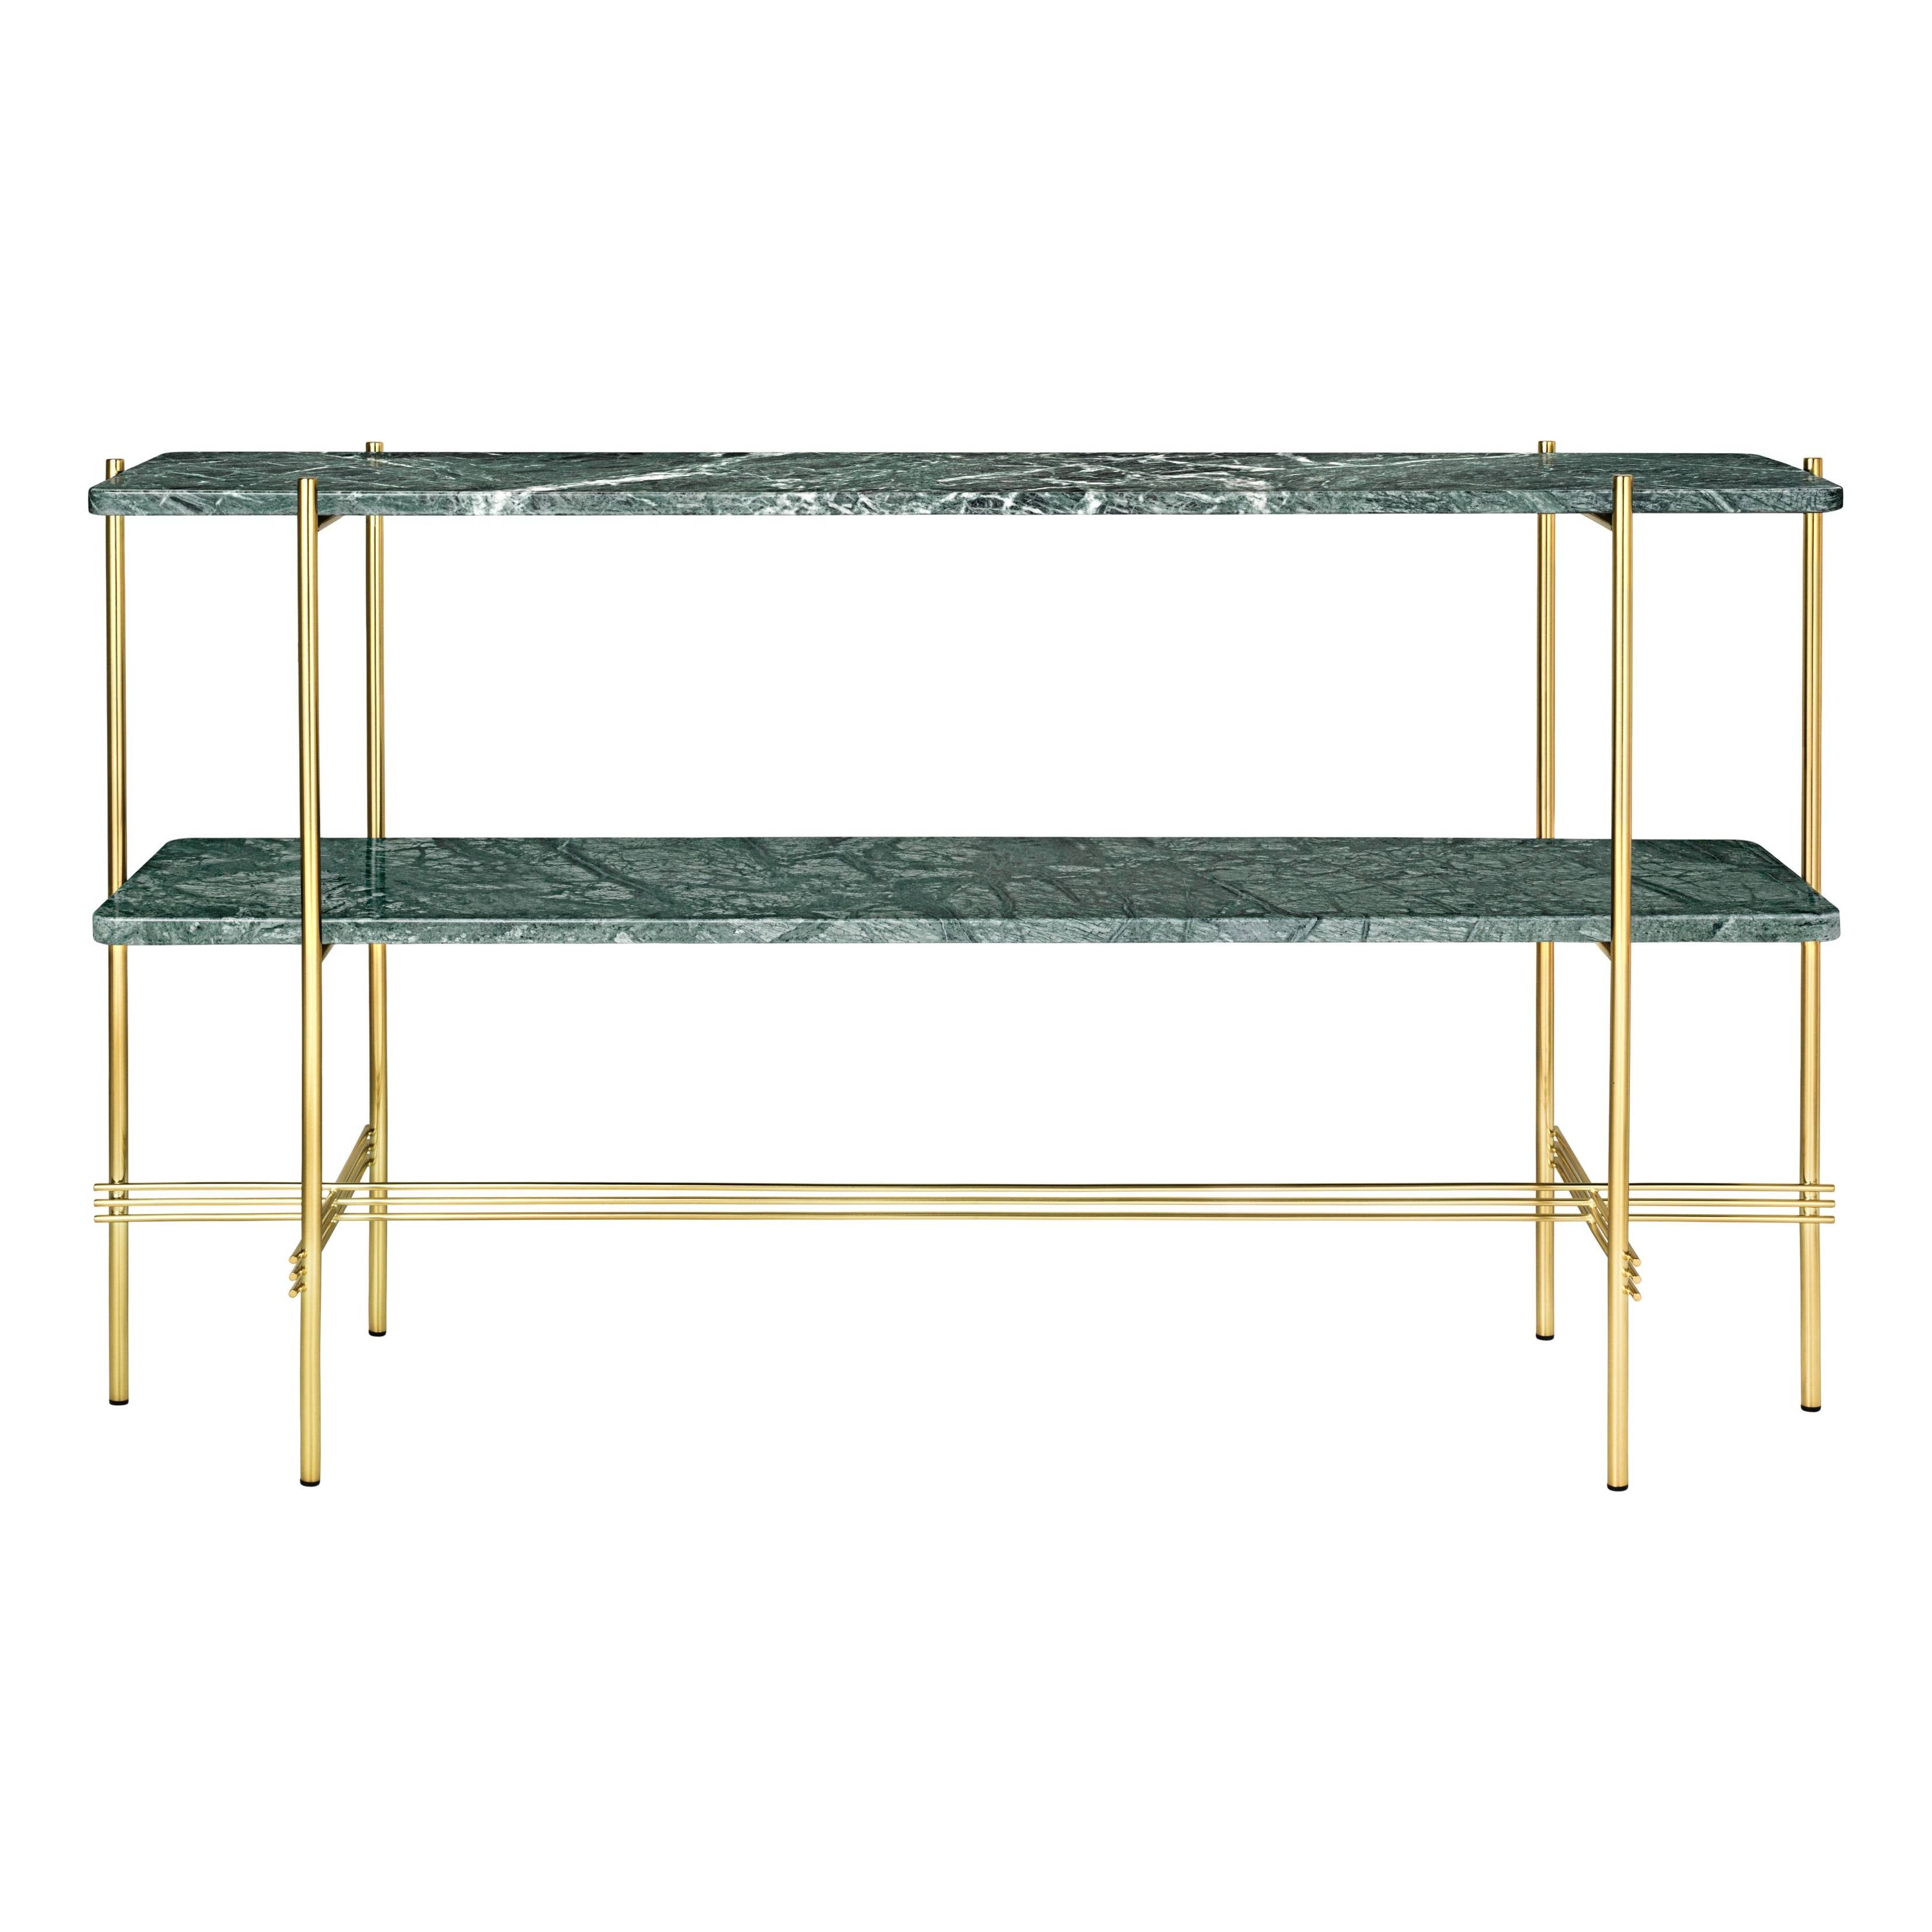 TS Console: Without Tray + Brass + Green Gautemala Marble